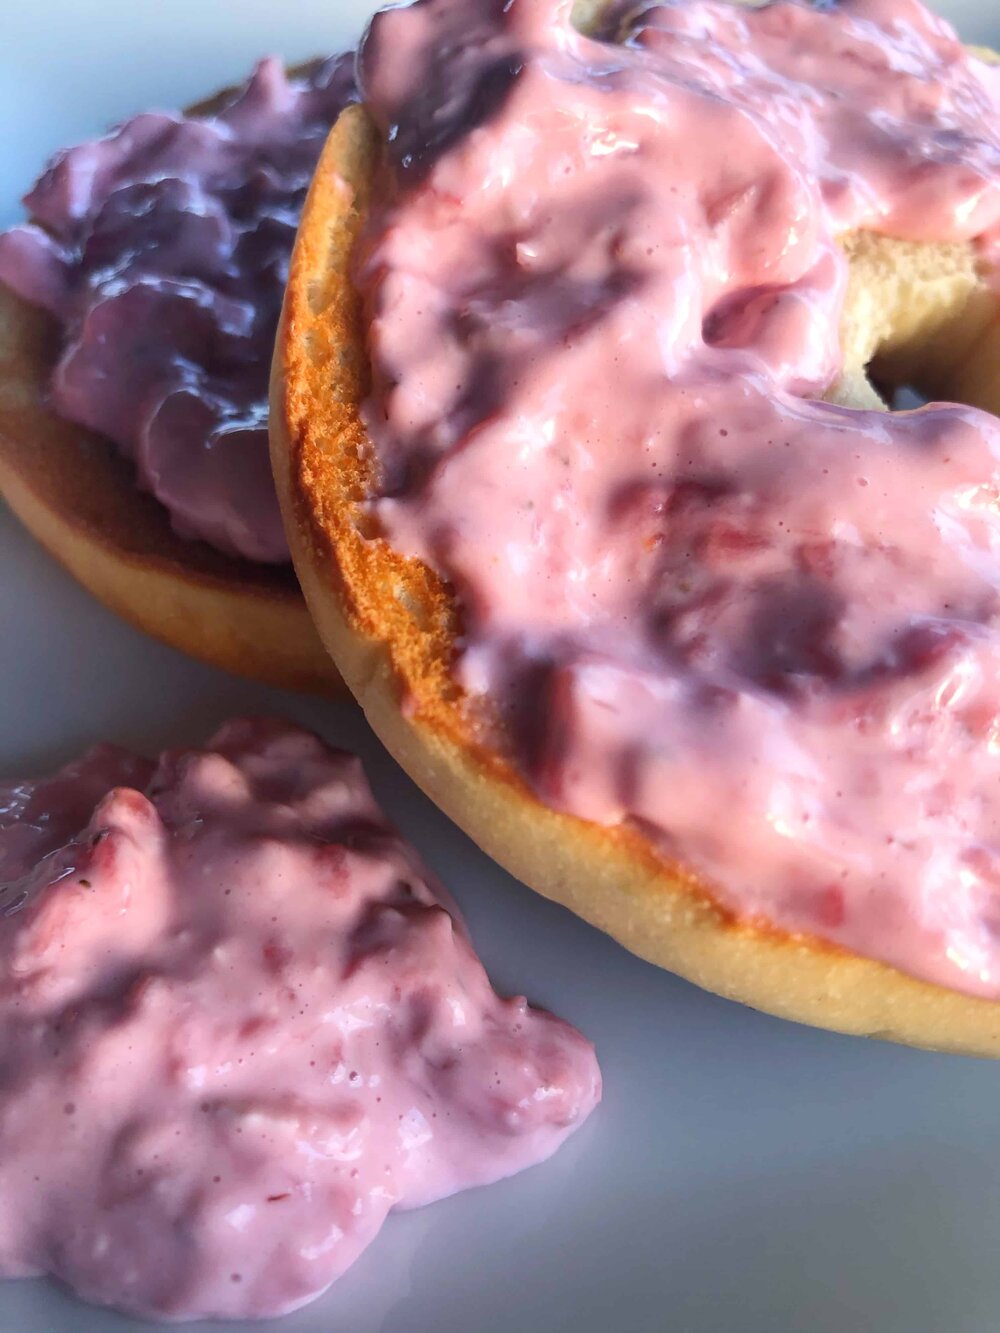 Missouri Girl Light and Healthy strawberry cream cheese. A delicious cream cheese that begins with a strawberry jam base before adding a light and healthy Greek cream cheese. So good and good for you too. Missouri Girl. Missouri Girl Blog.